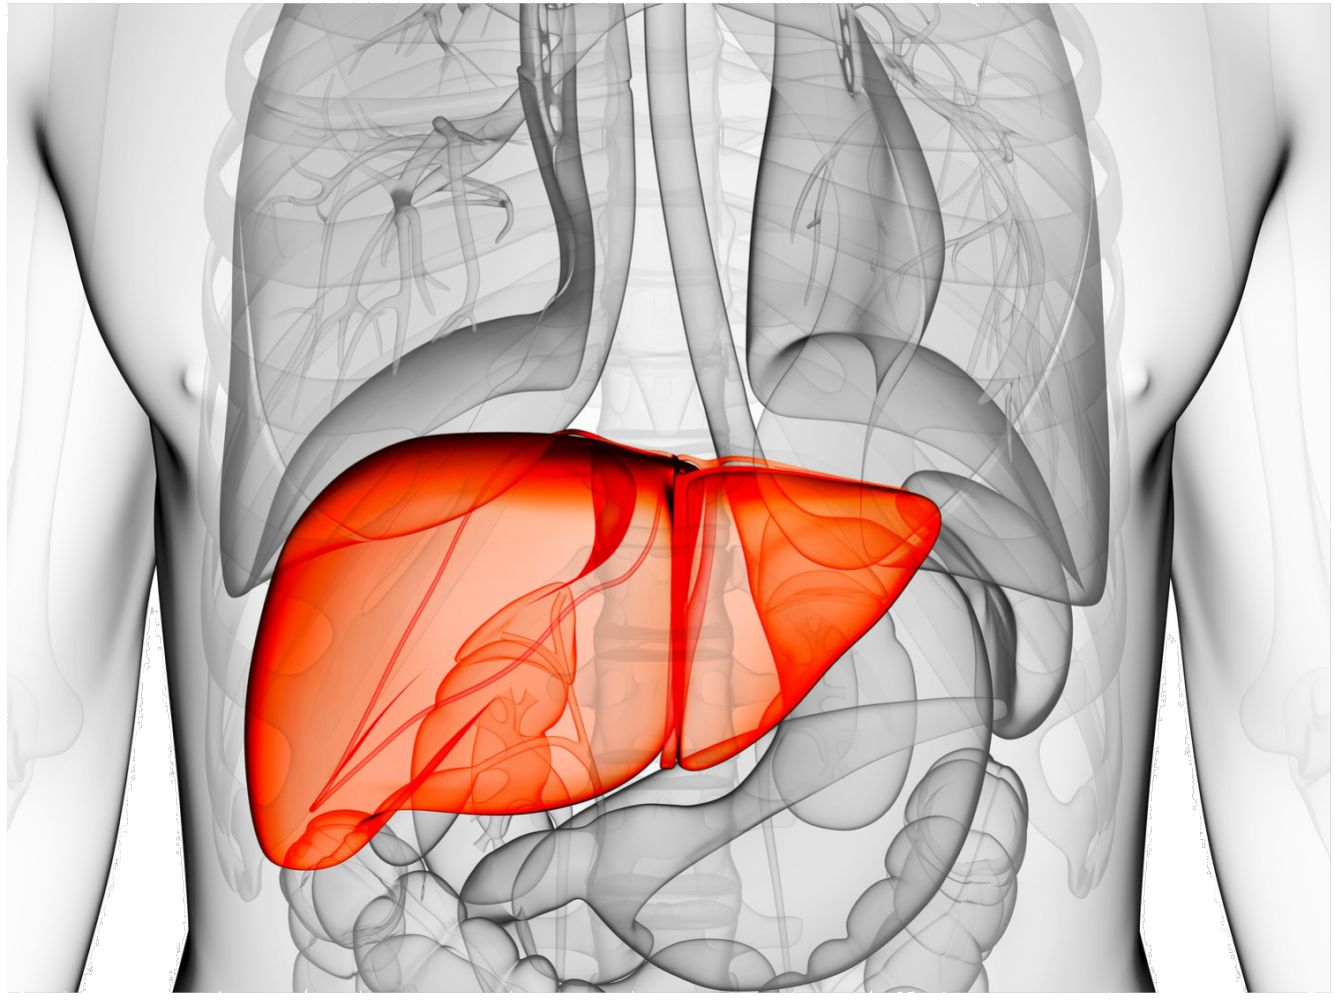 Liver- Anatomy, Functions and Conditions